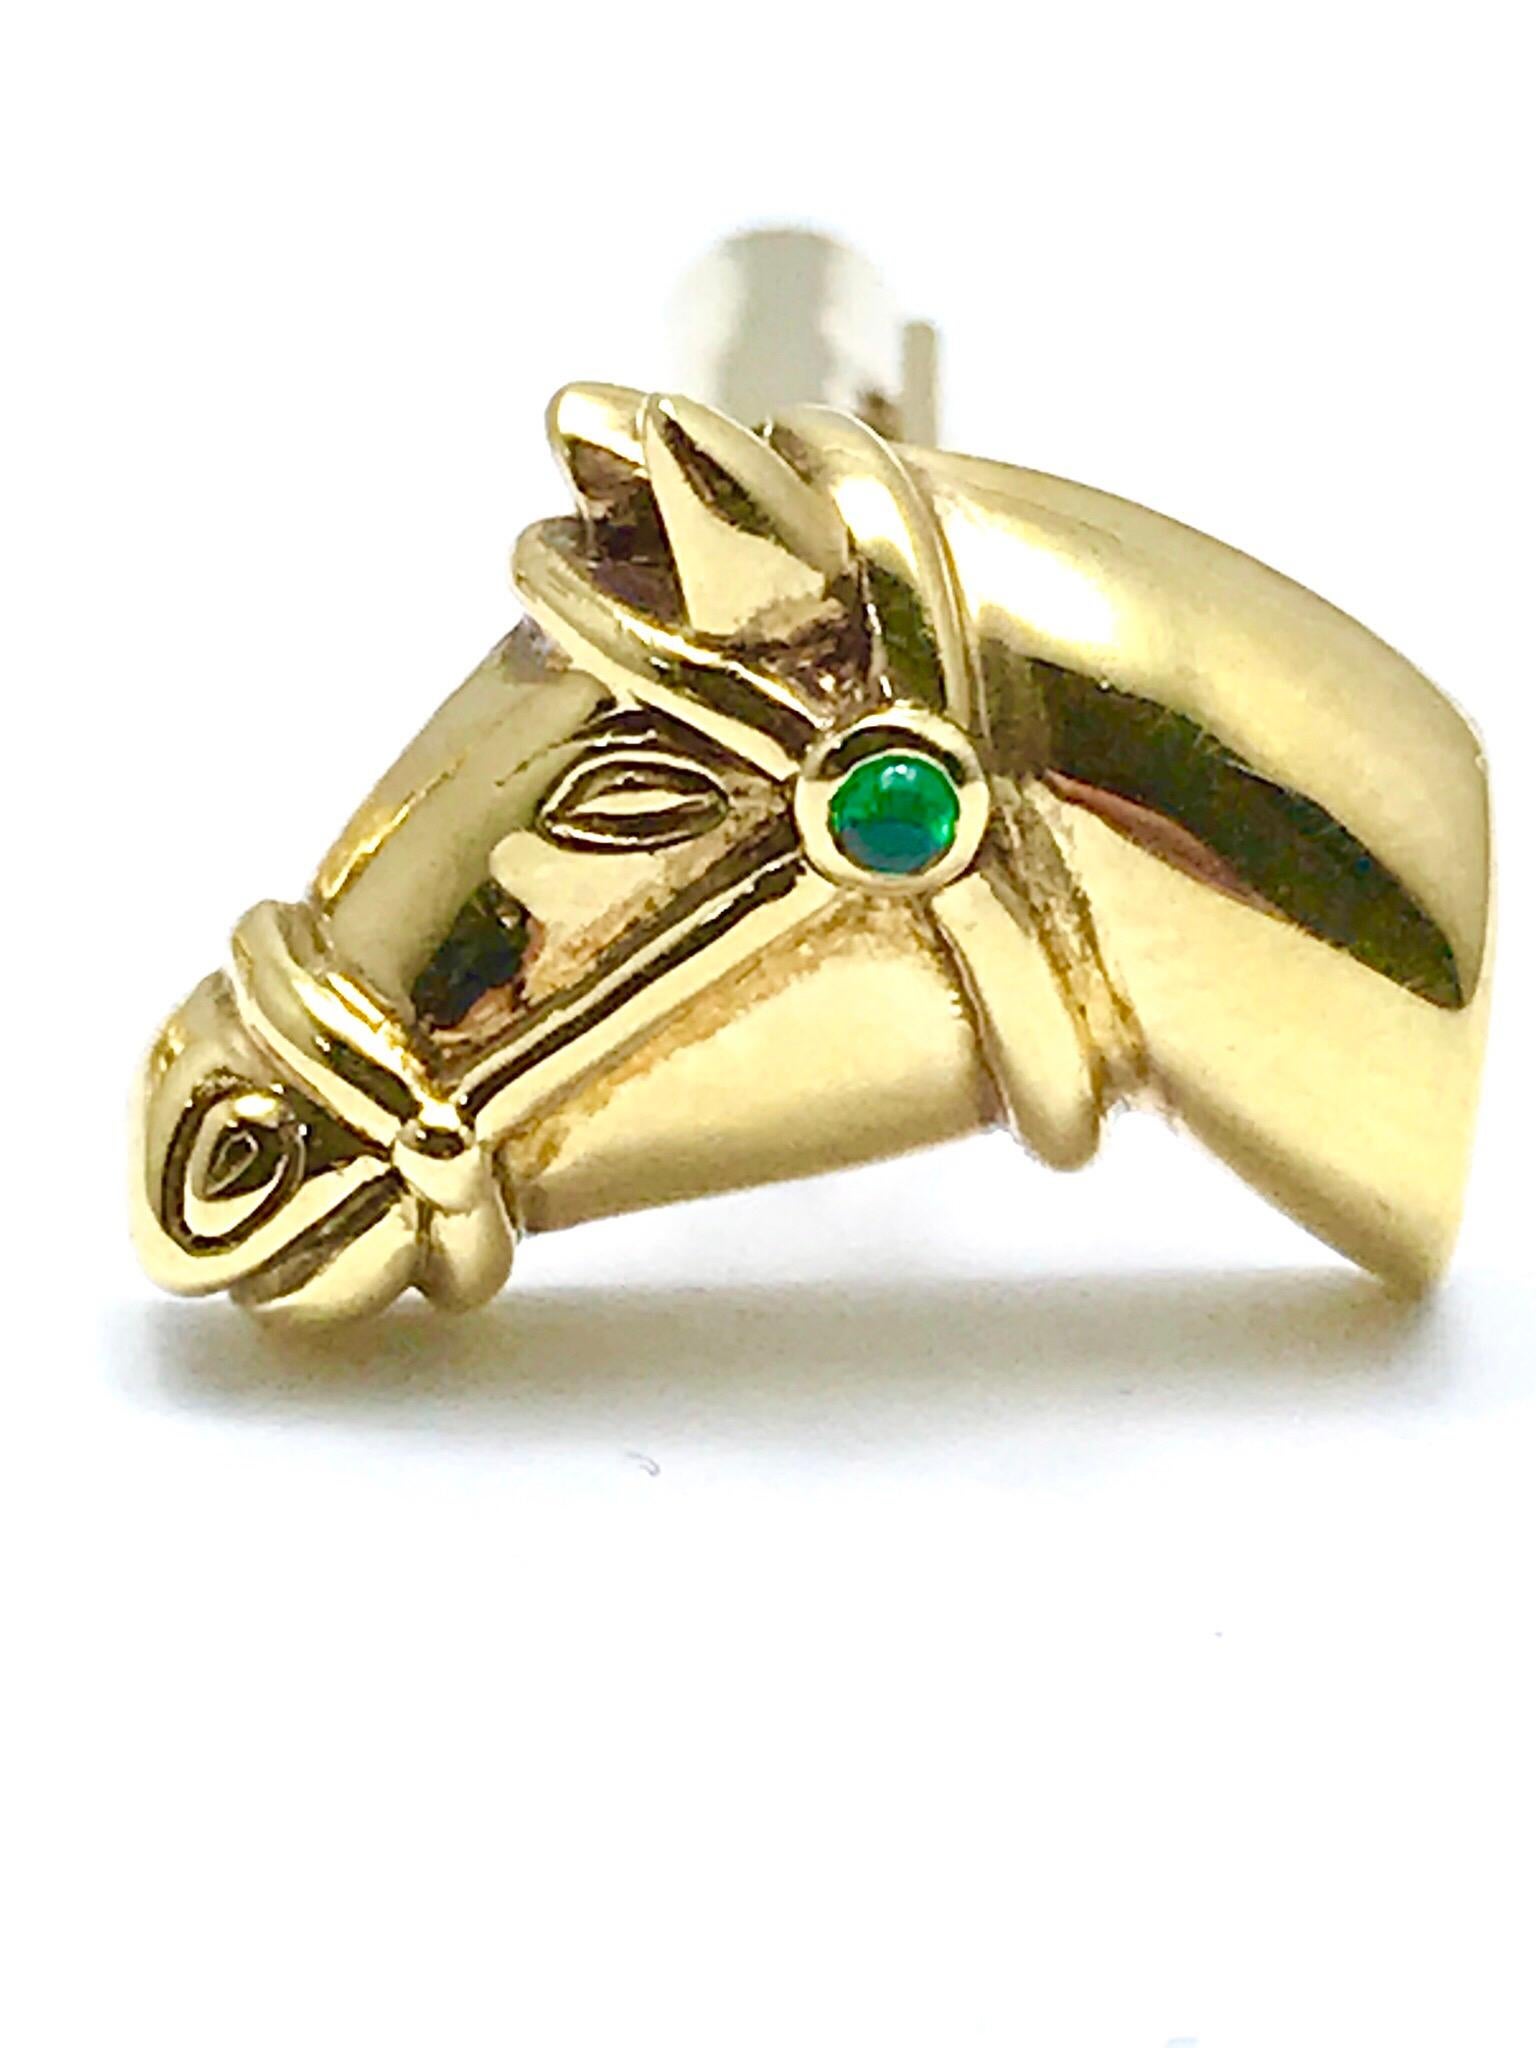 Women's or Men's 18 Karat Yellow Gold Horse Cufflinks with an Emerald Accent Bridle For Sale